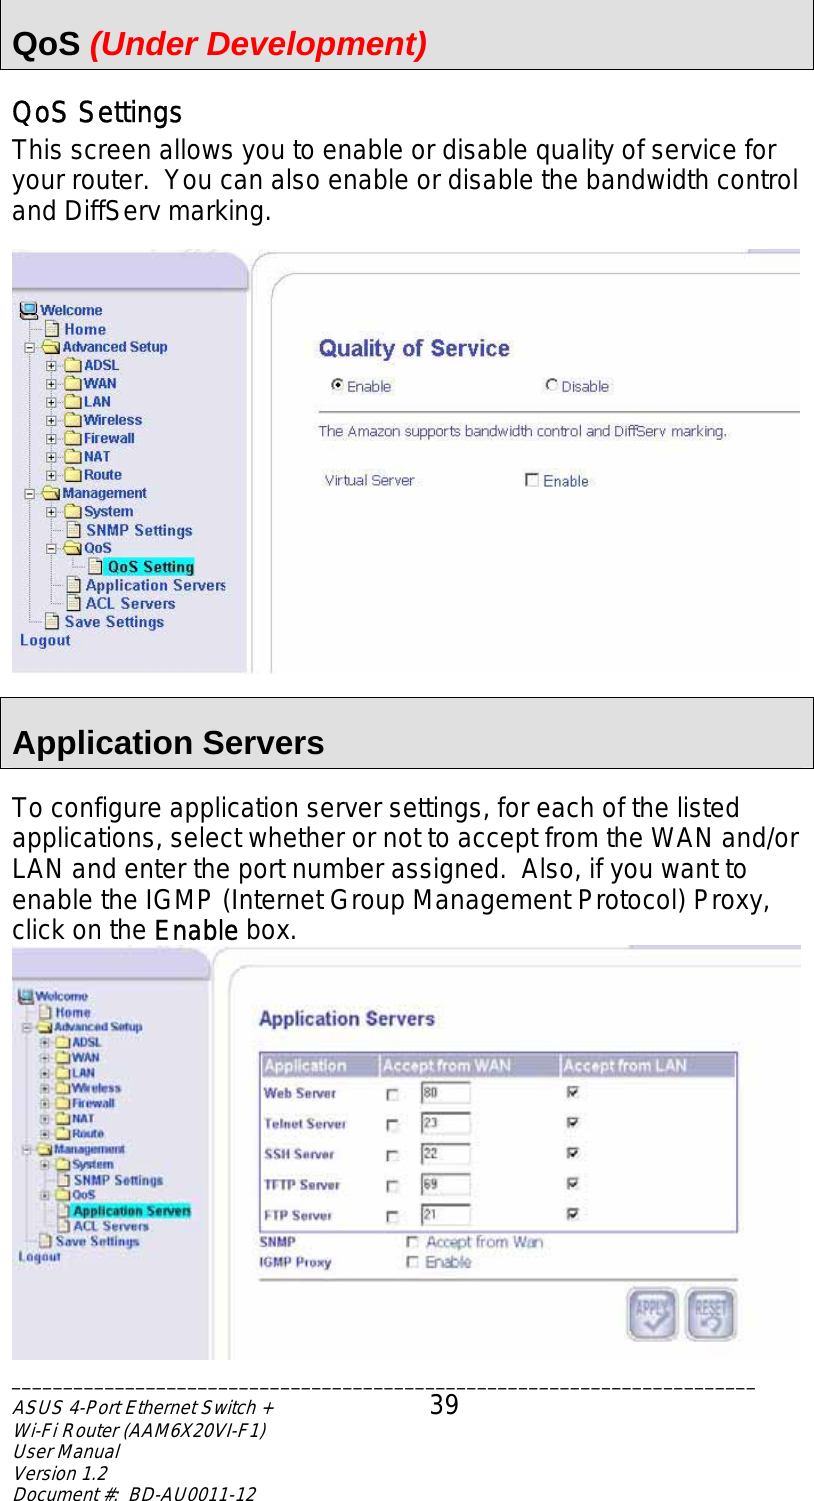  QoS (Under Development) QoS Settings This screen allows you to enable or disable quality of service for your router.  You can also enable or disable the bandwidth control and DiffServ marking.    Application Servers  To configure application server settings, for each of the listed applications, select whether or not to accept from the WAN and/or LAN and enter the port number assigned.  Also, if you want to enable the IGMP (Internet Group Management Protocol) Proxy, click on the Enable box.  ________________________________________________________________________ASUS 4-Port Ethernet Switch +  39 Wi-Fi Router (AAM6X20VI-F1) User Manual                                                                         Version 1.2 Document #:  BD-AU0011-12  